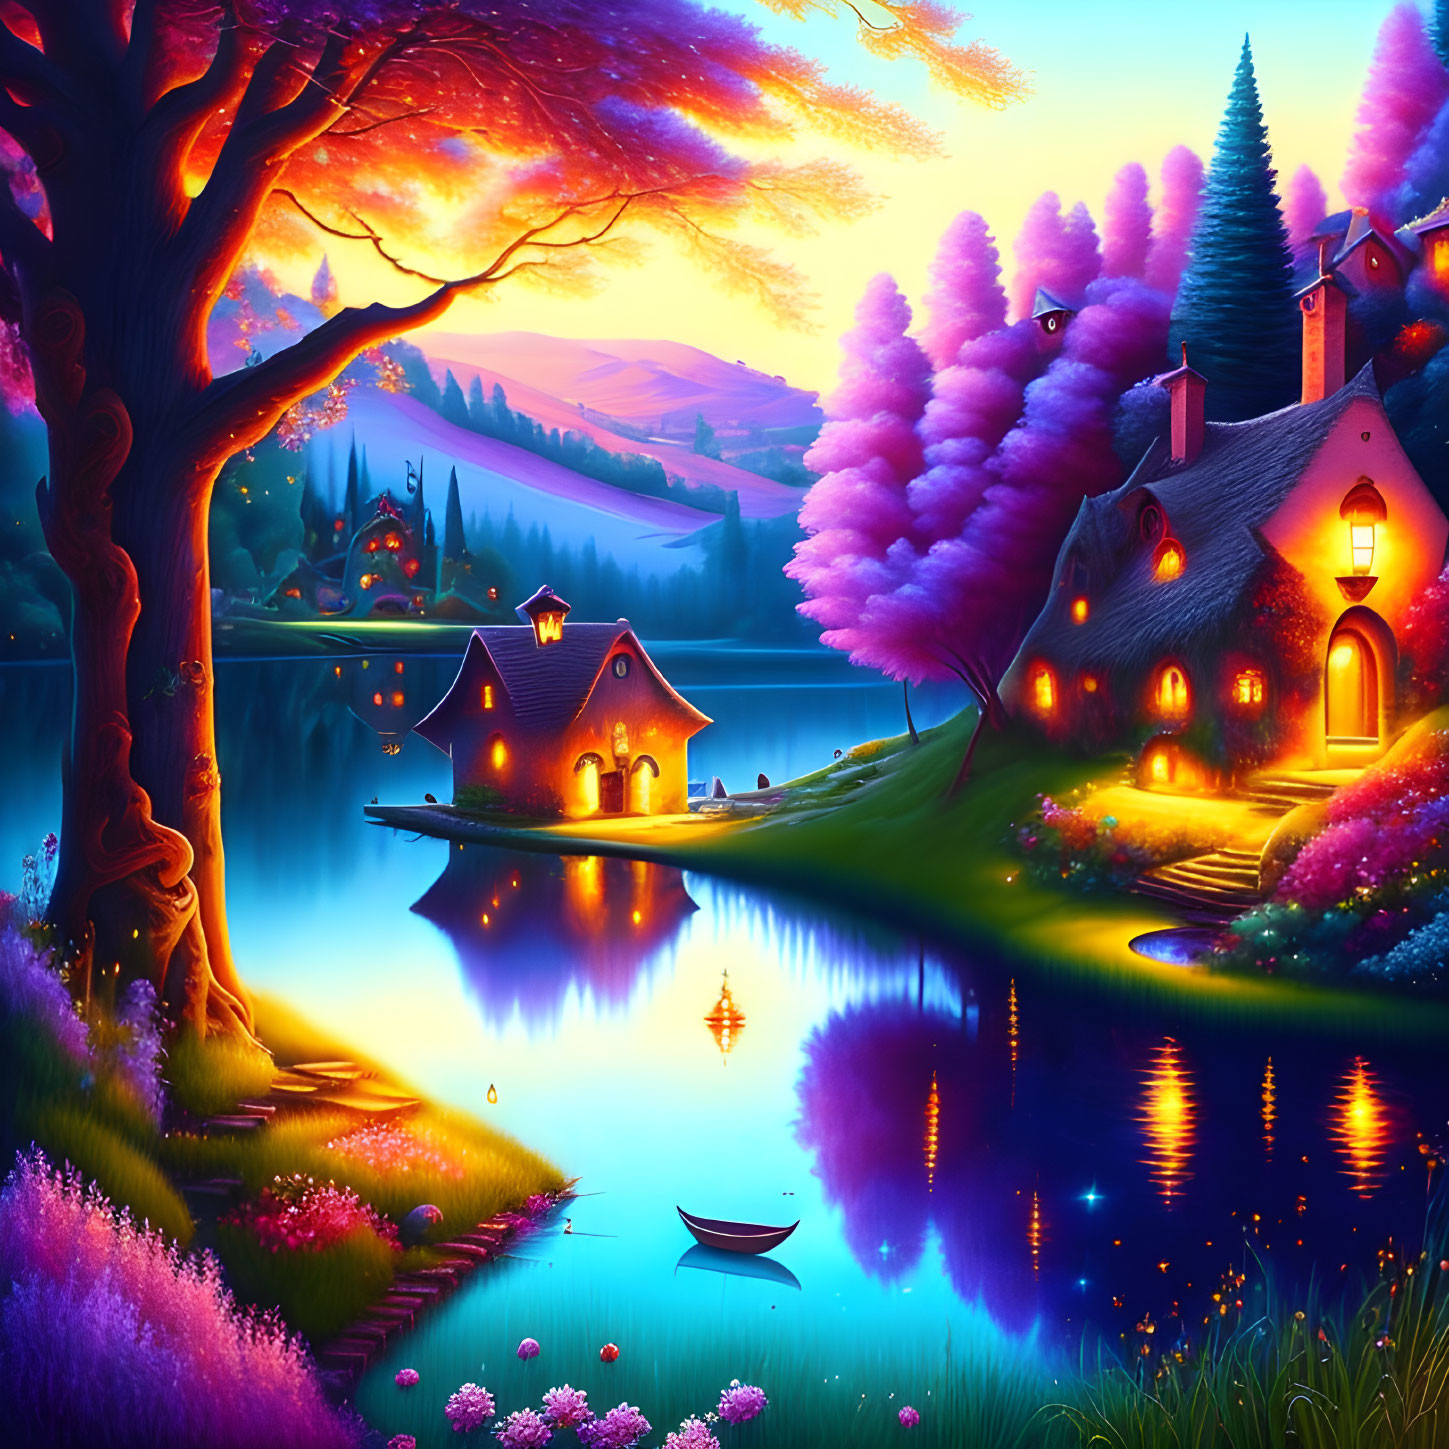 Colorful Fantasy Landscape with Glowing Cottage by Serene Lake